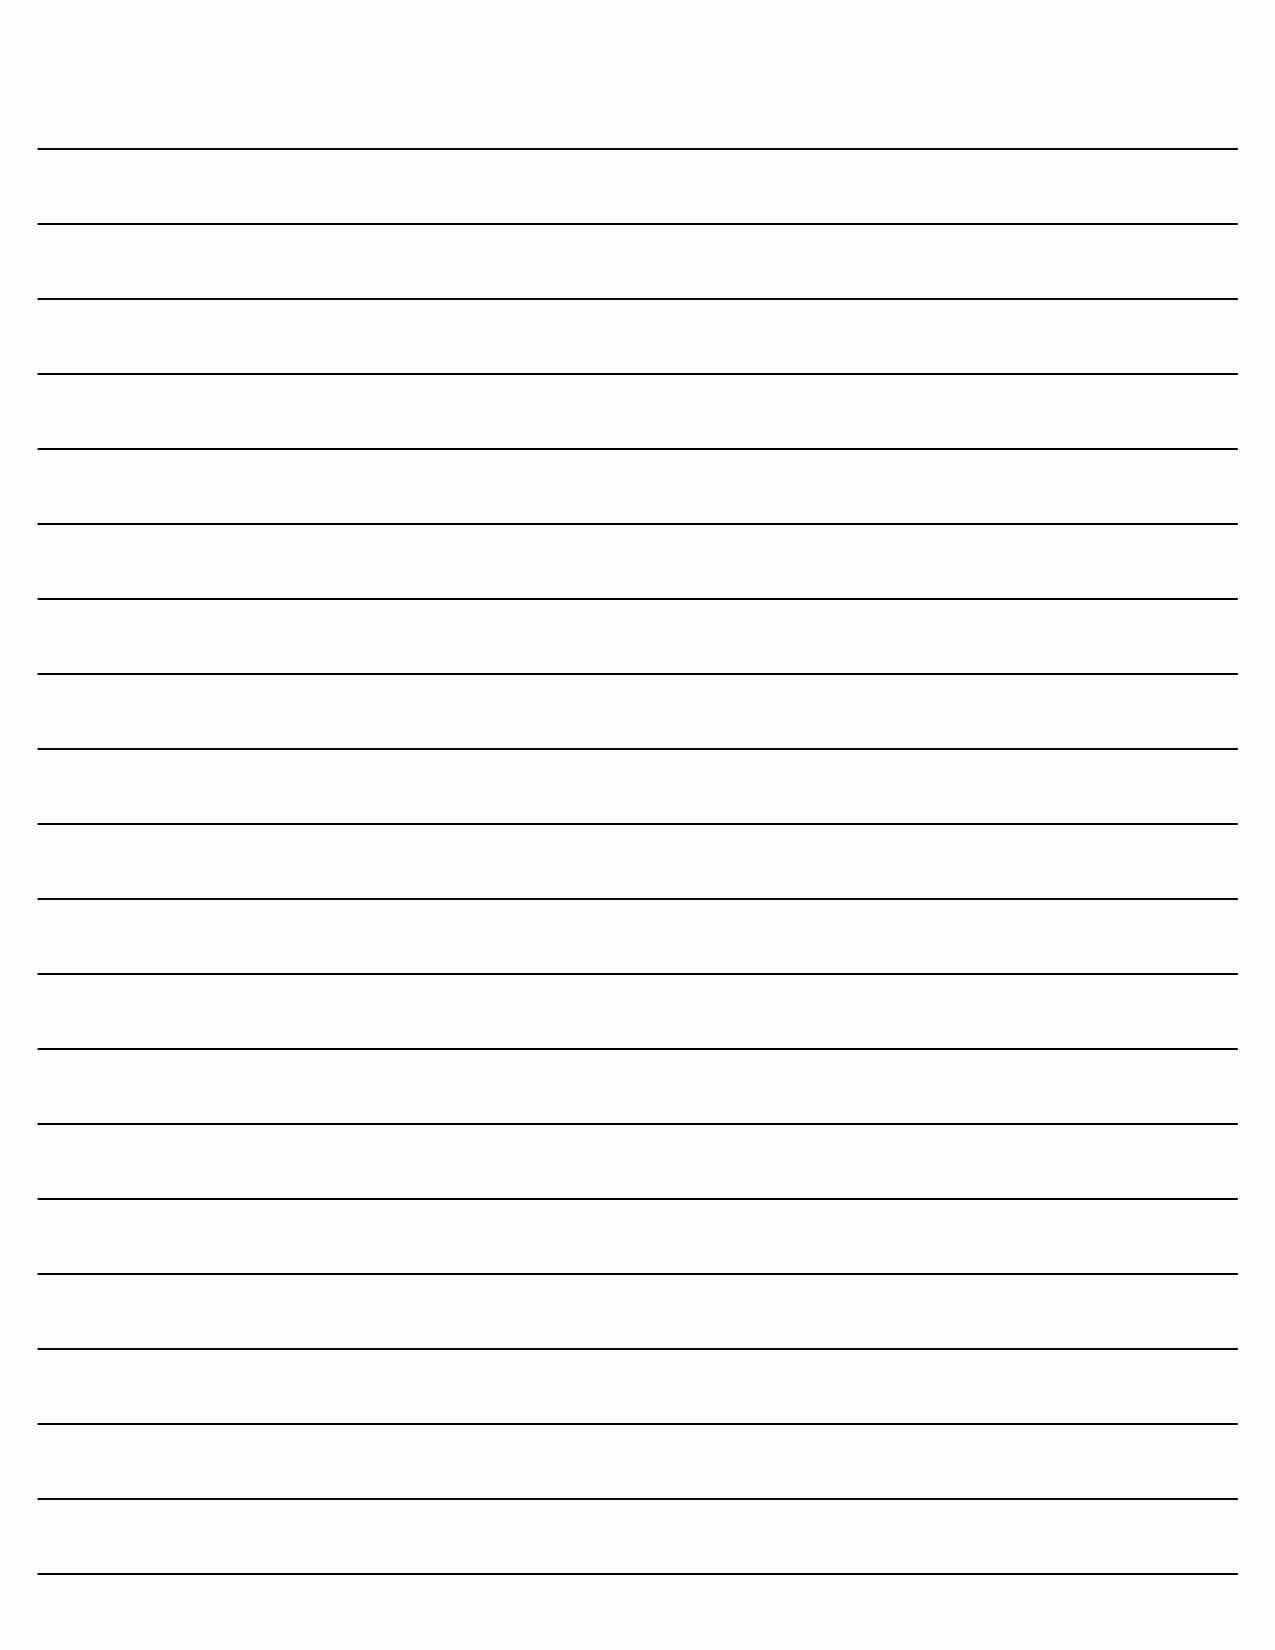 Free Printable Lined Paper Unique Printable Lined Paper 01 1275×1650